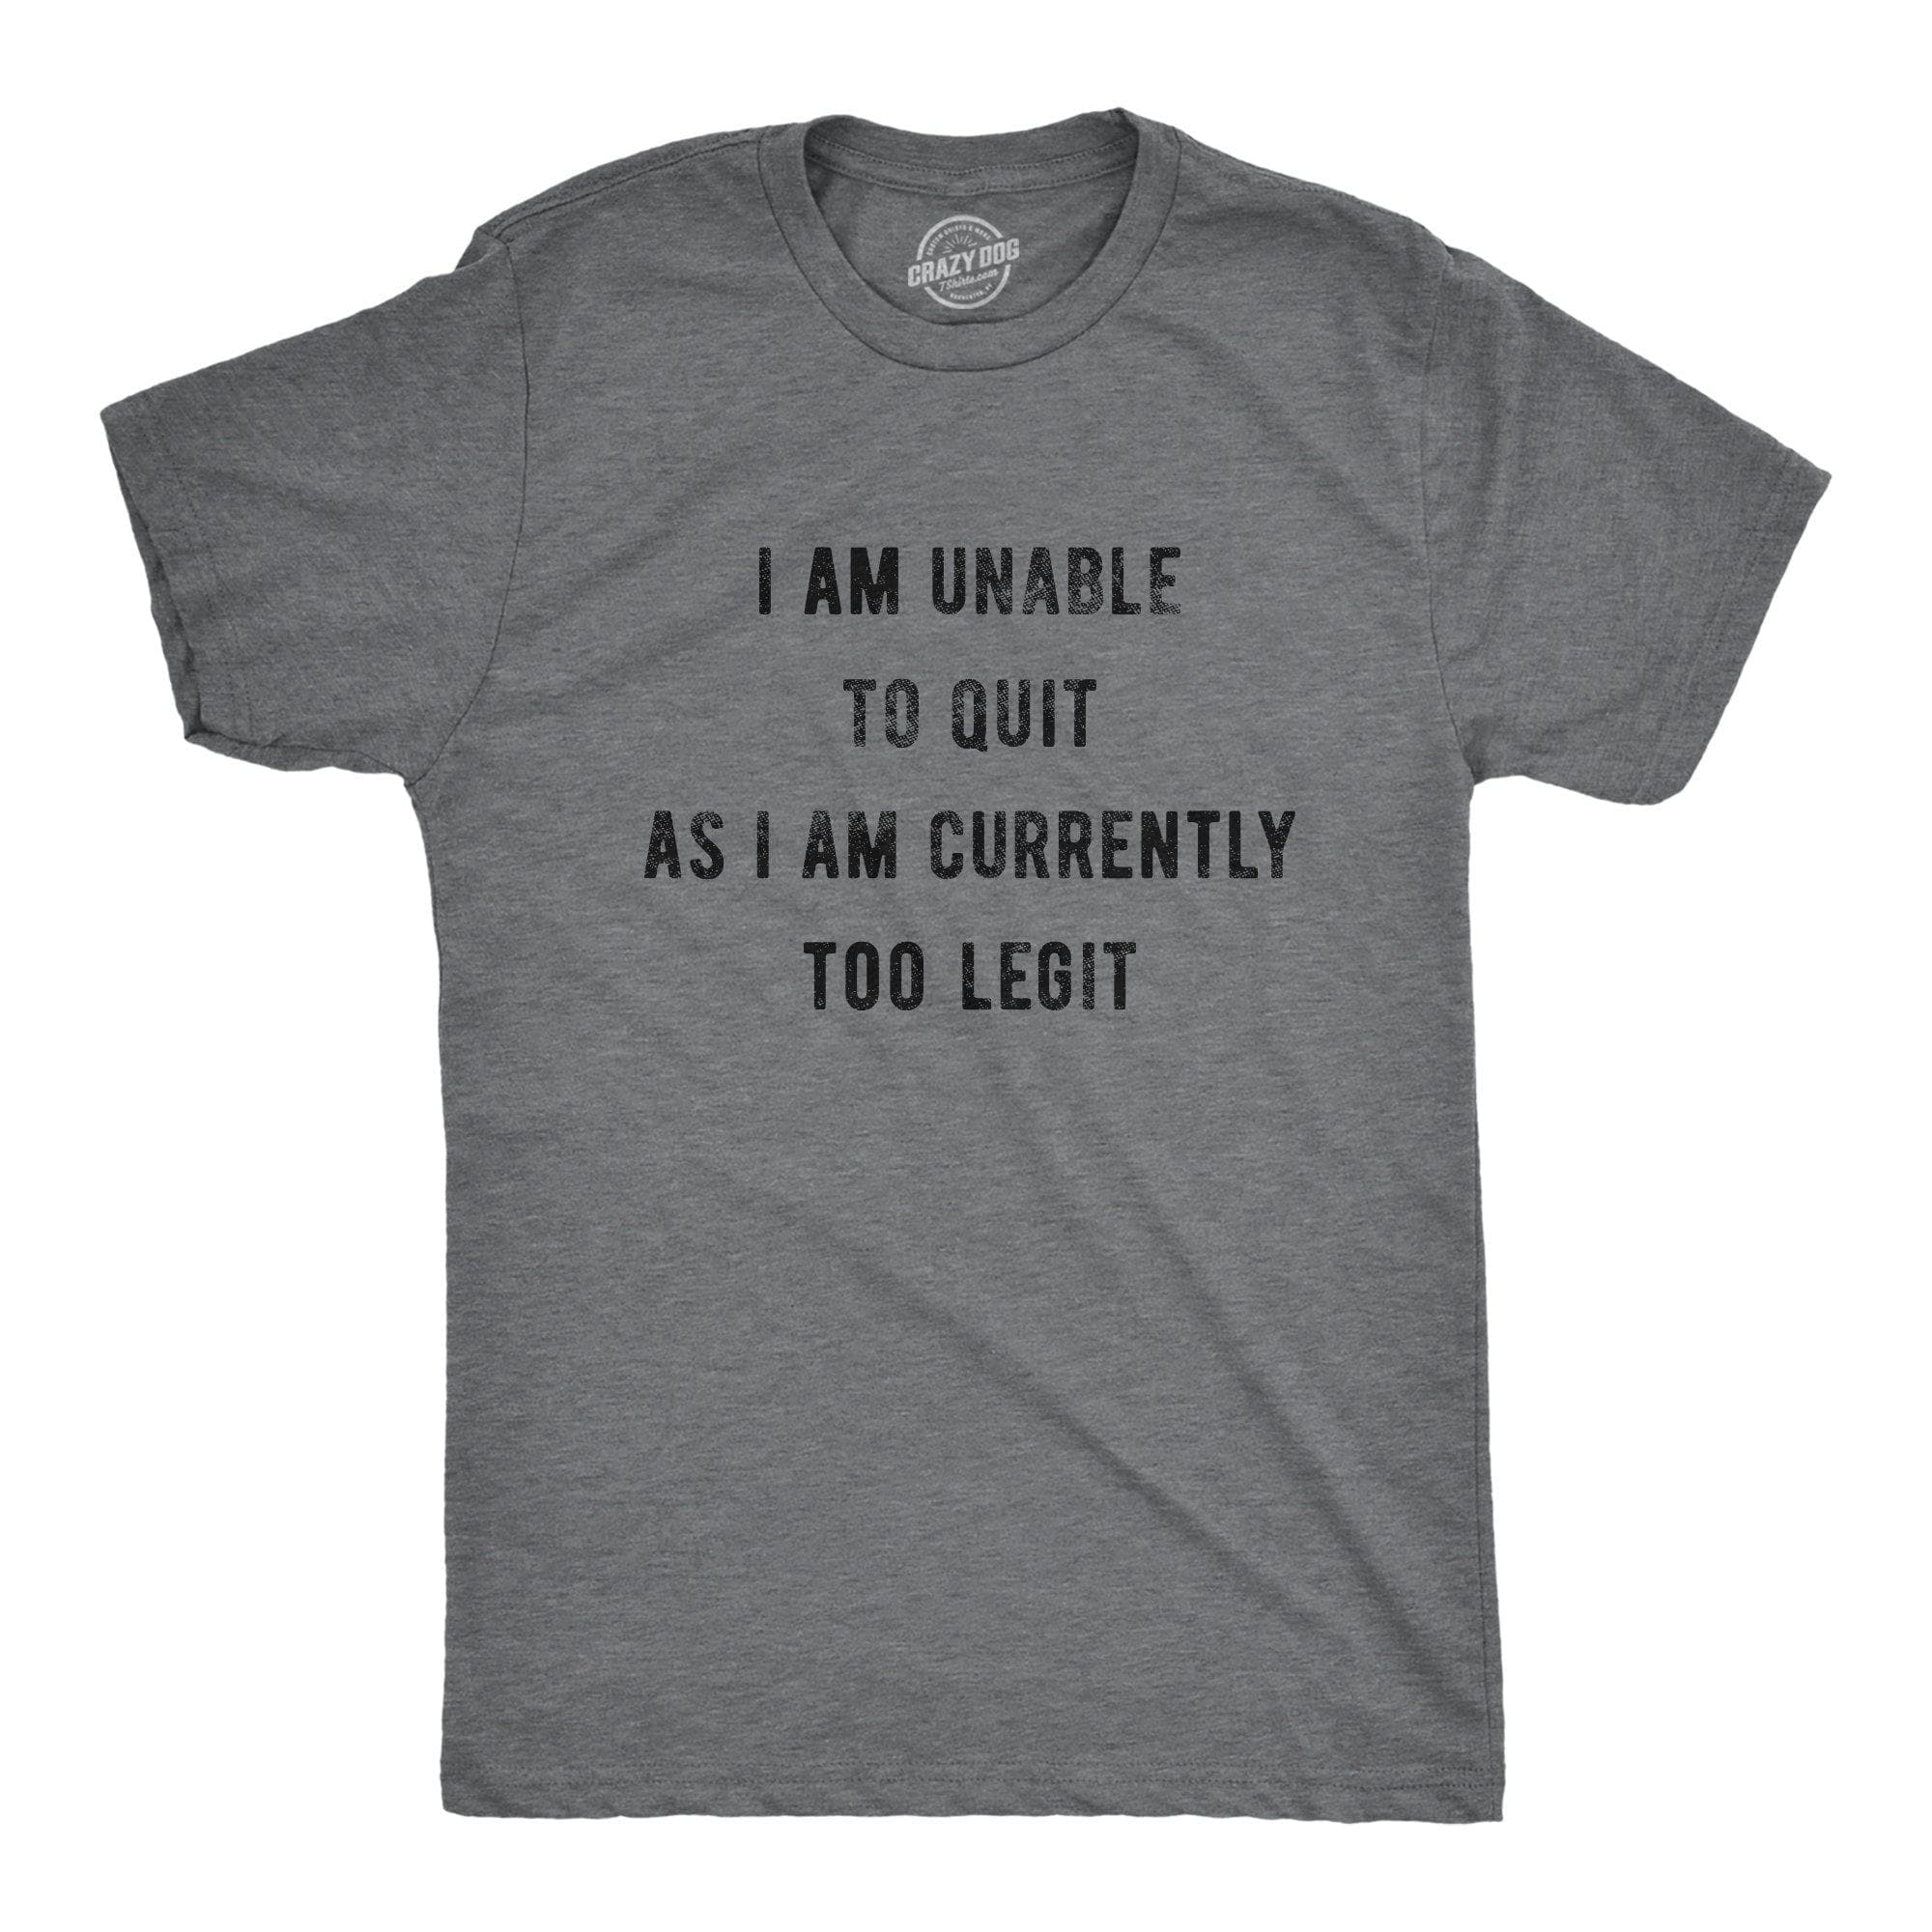 I Am Unable To Quit As I Am Currently Too Legit Men's Tshirt - Crazy Dog T-Shirts